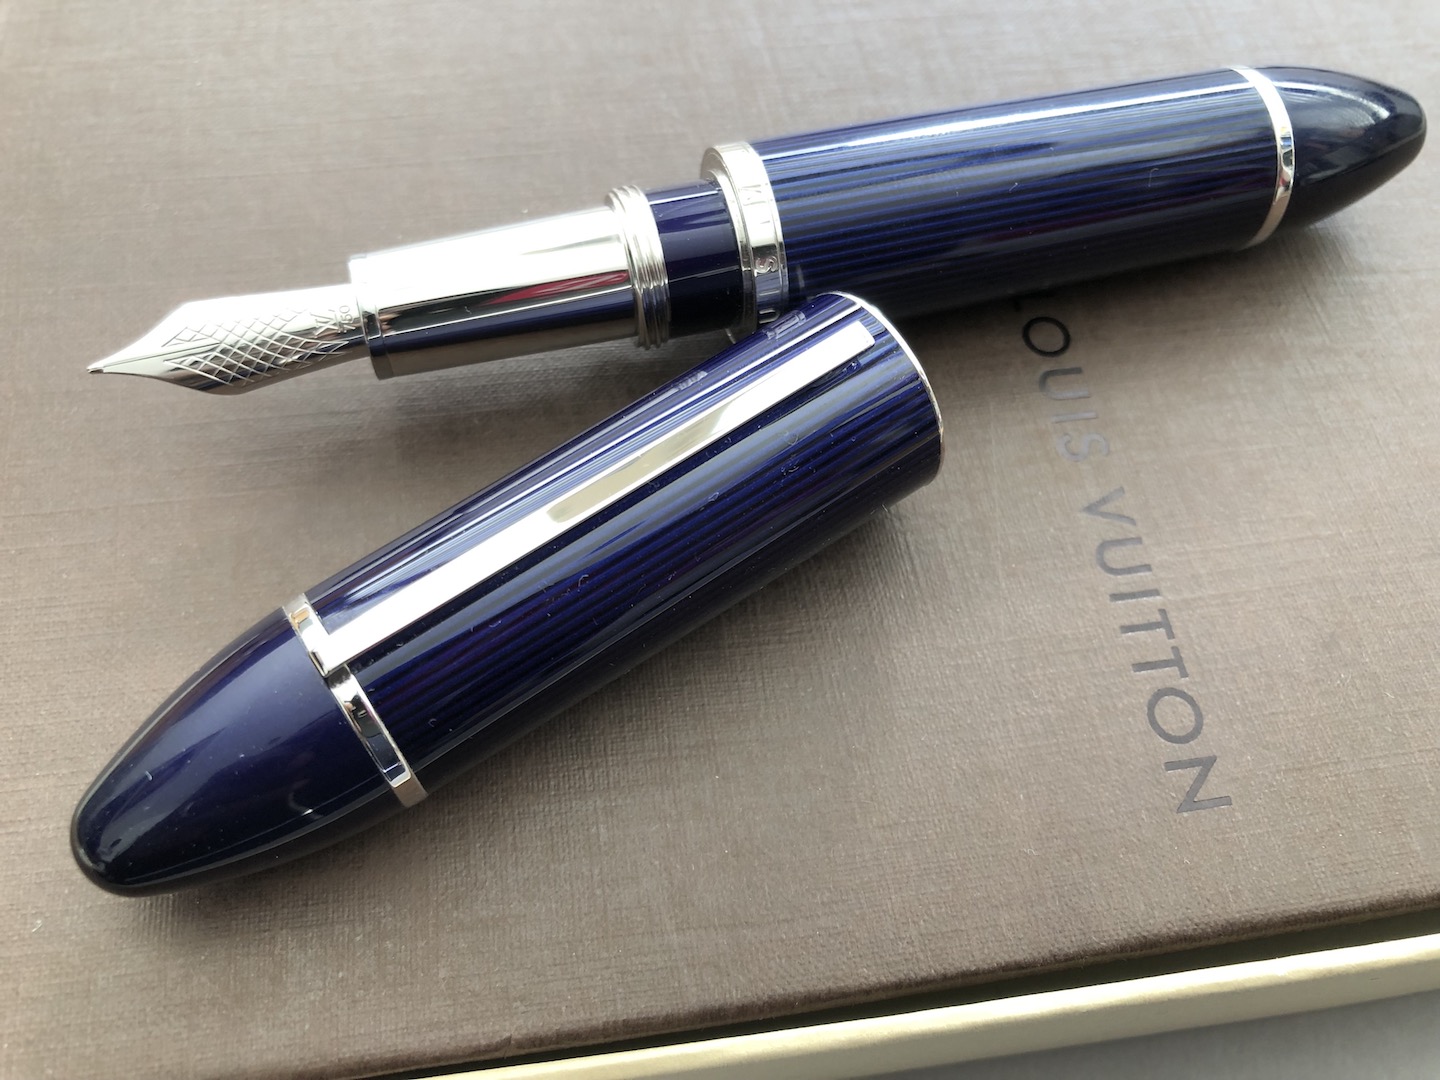 Sold at Auction: Louis Vuitton, LOUIS VUITTON FOUNTAIN PEN CARGO  COLLECTION. IN BLUE LACQUER WITH BLACK STRIPES AND PLATINUM PLATING DETAILS.